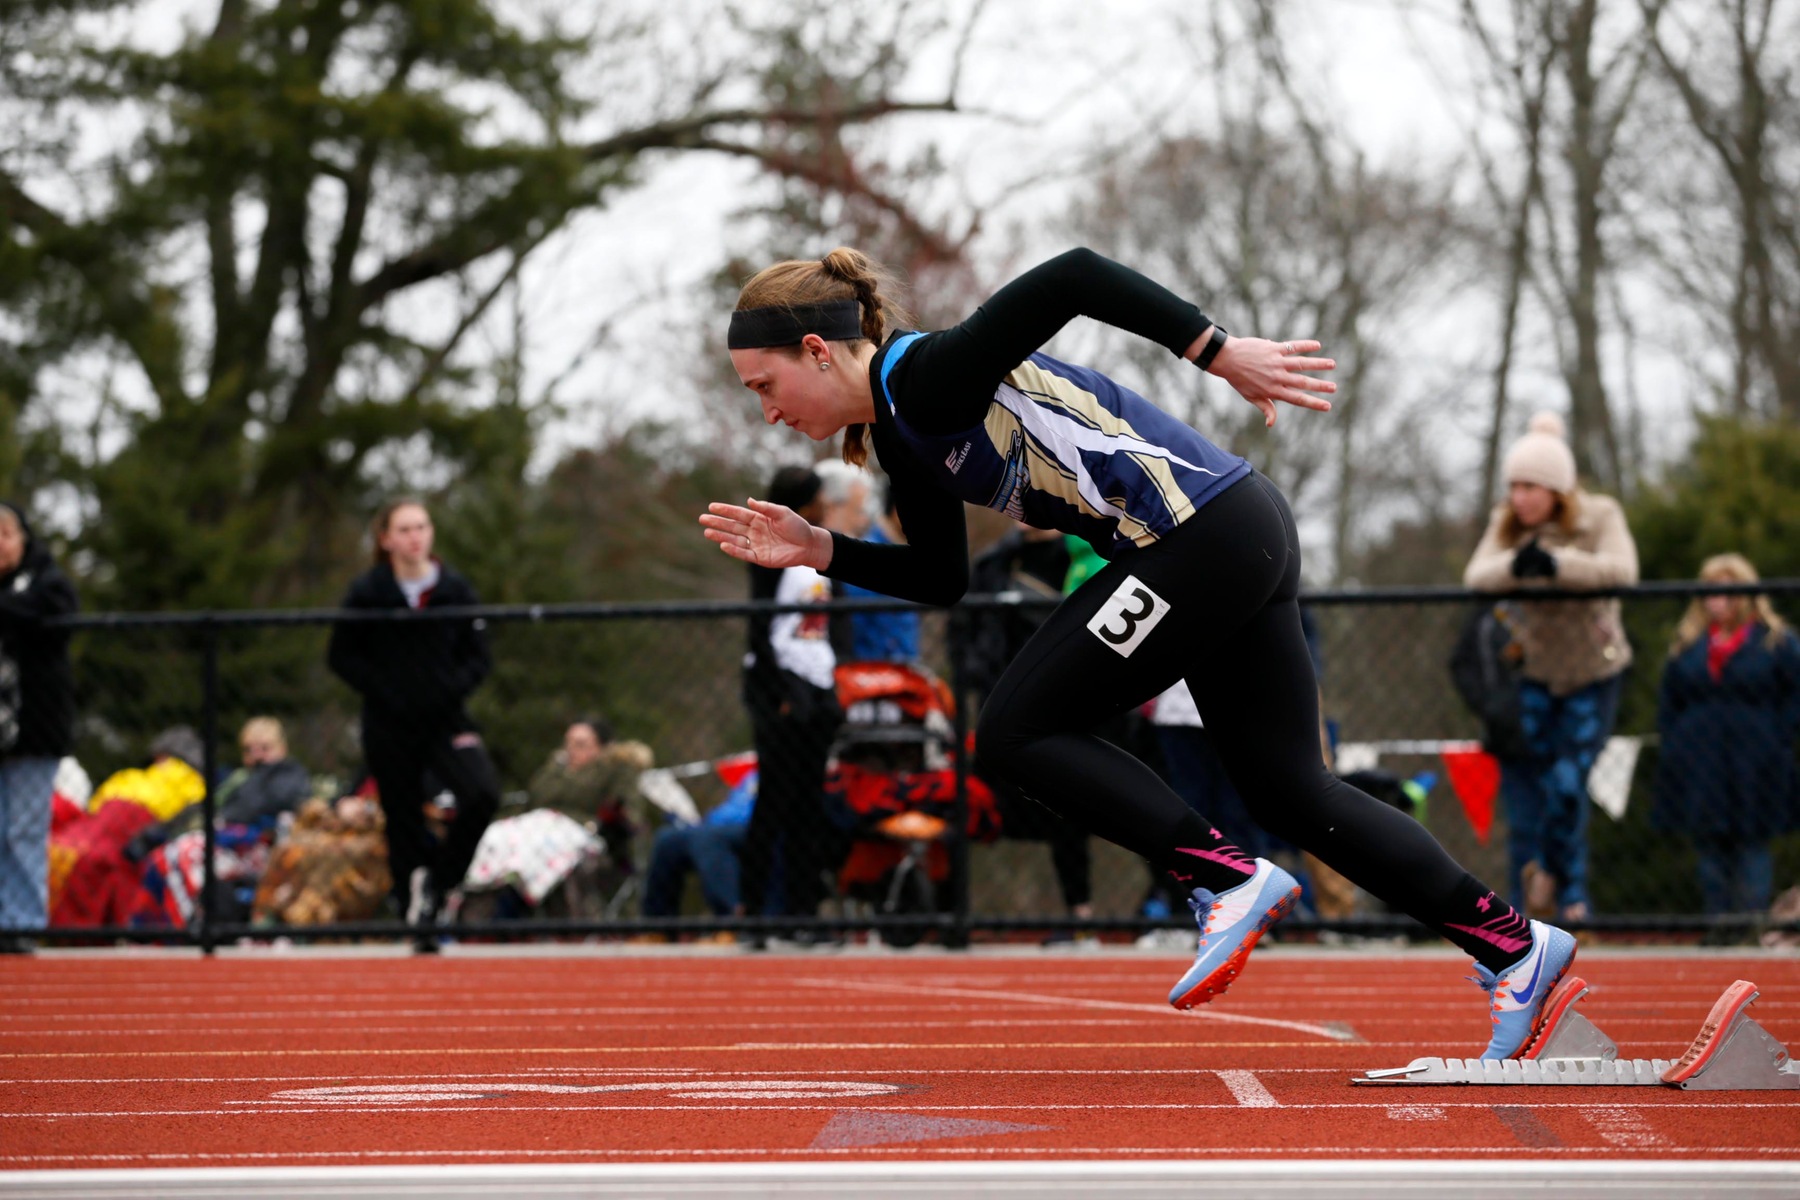 Track & Field Finish Regular Season at ECSU and MIT before MASCAC Championships; McCabe Does it Again